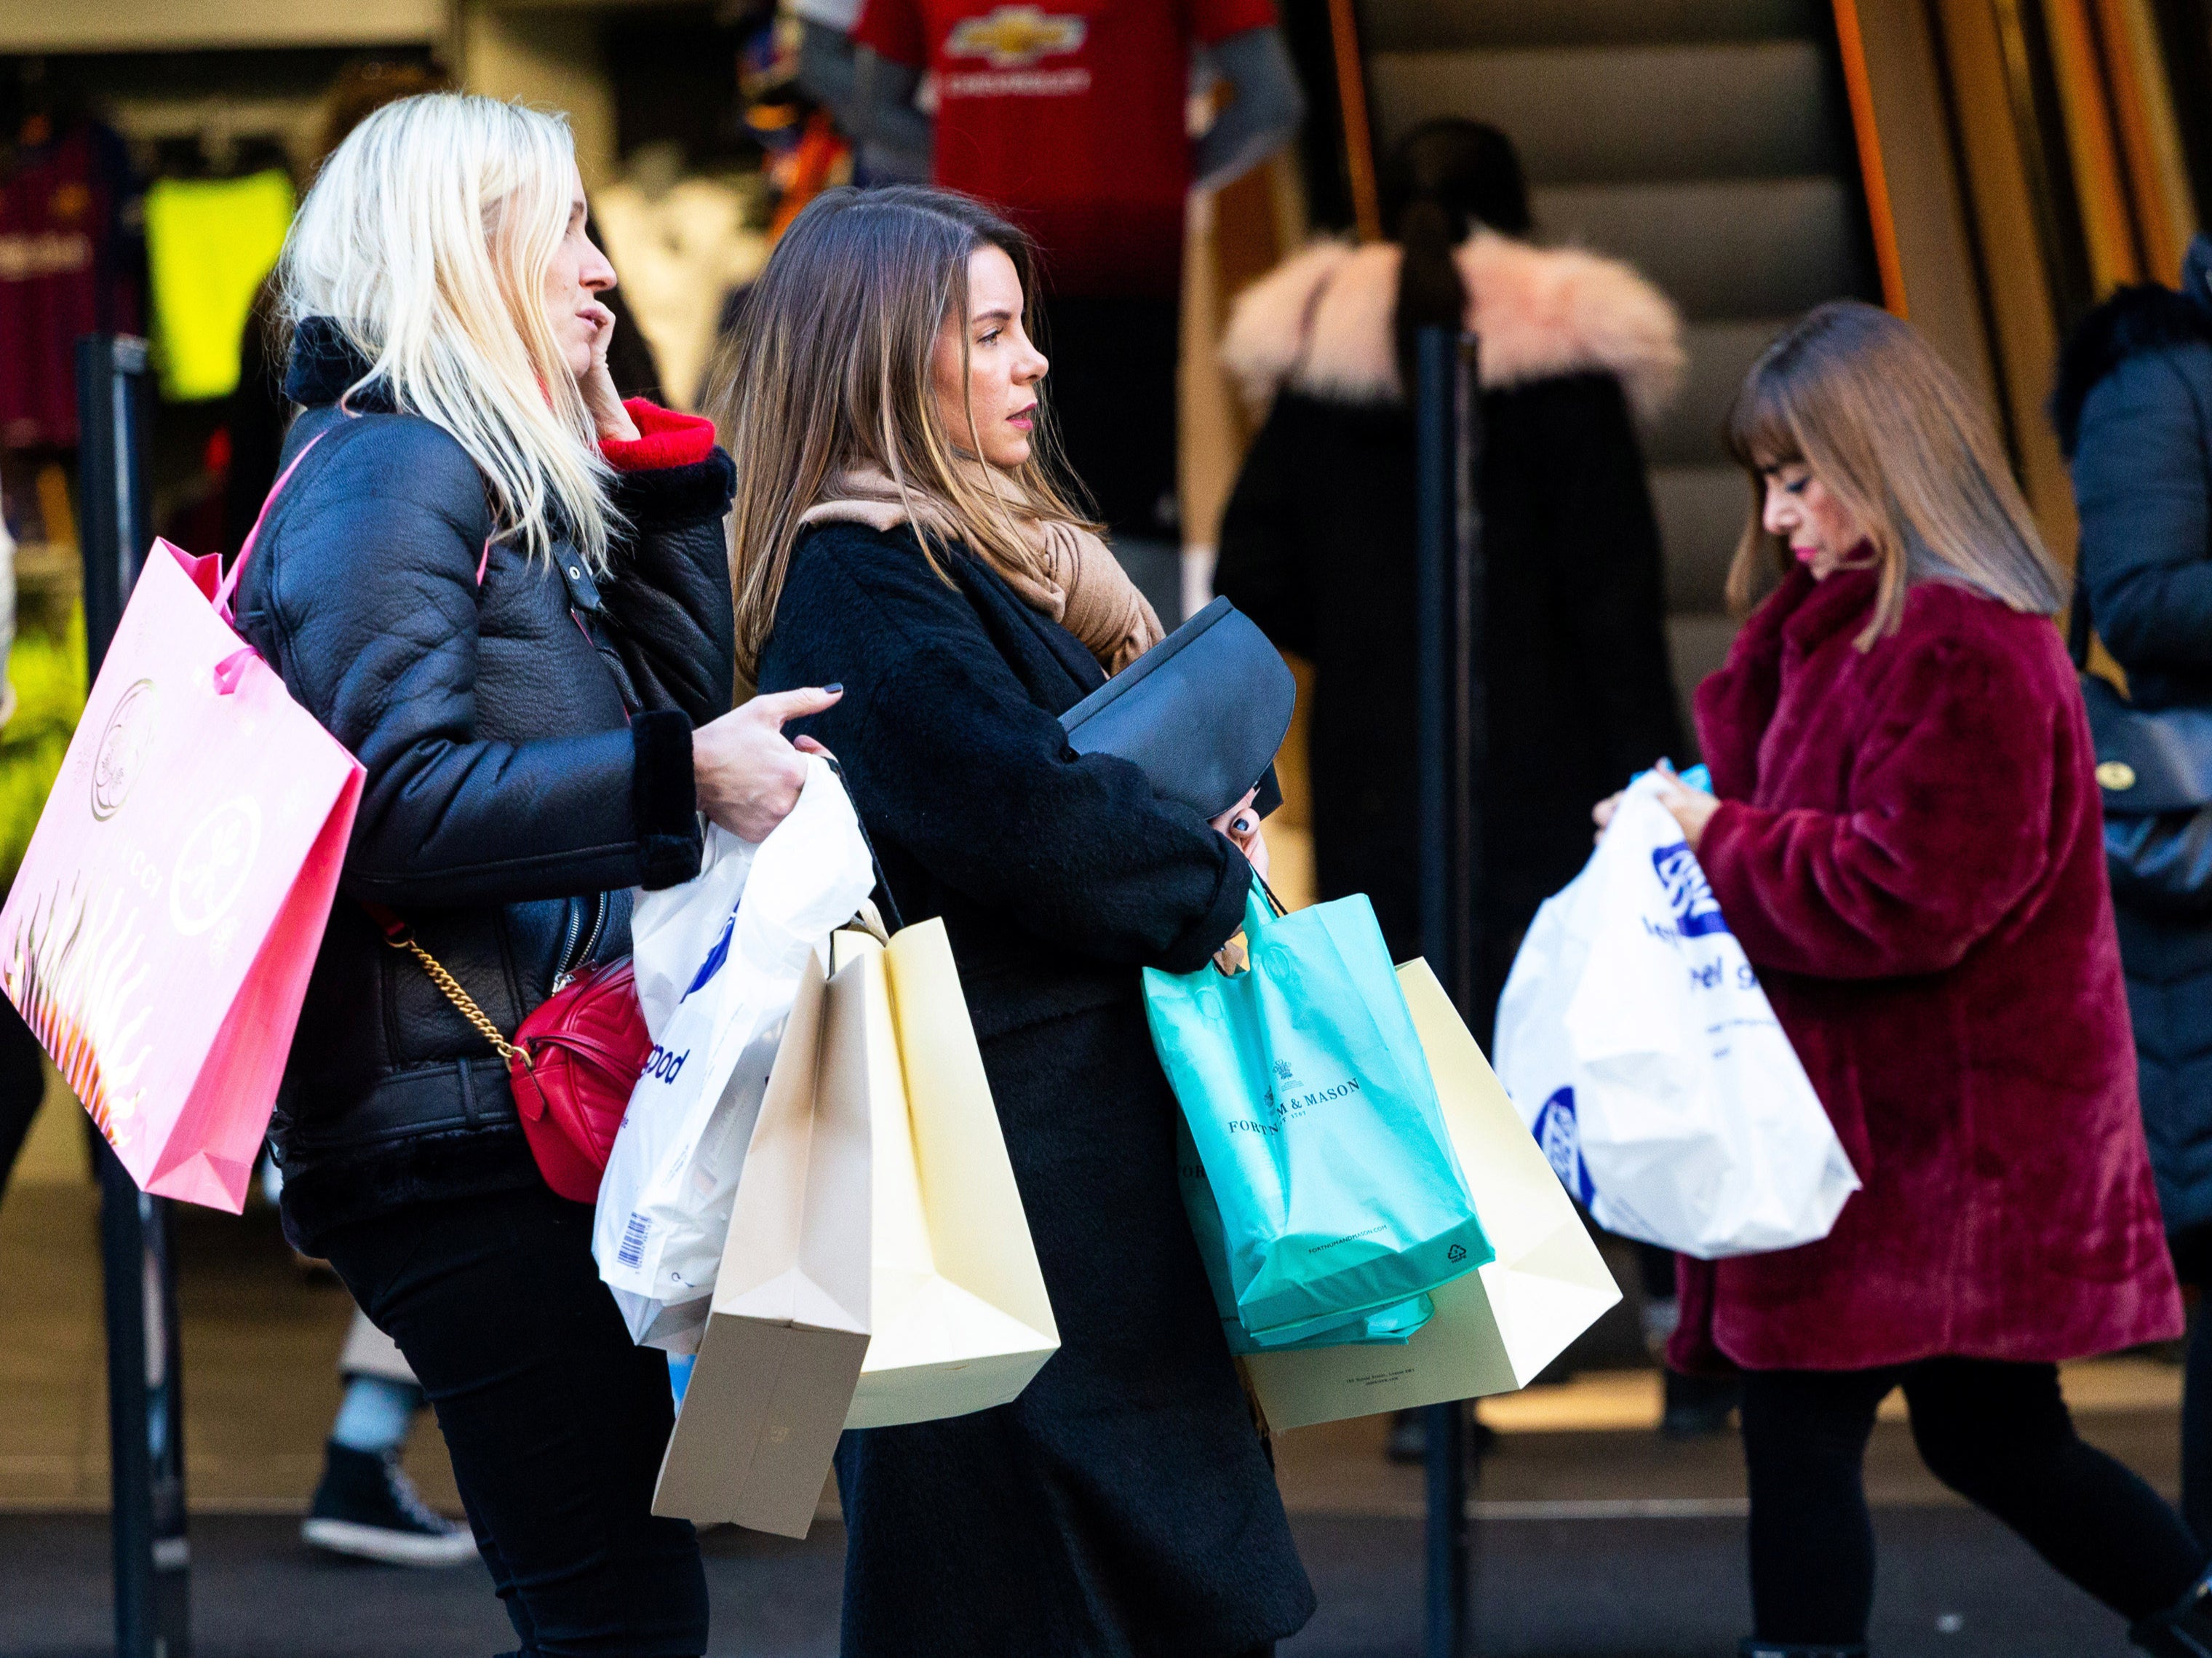 One-third of people say they won’t buy presents for people outside their immediate family